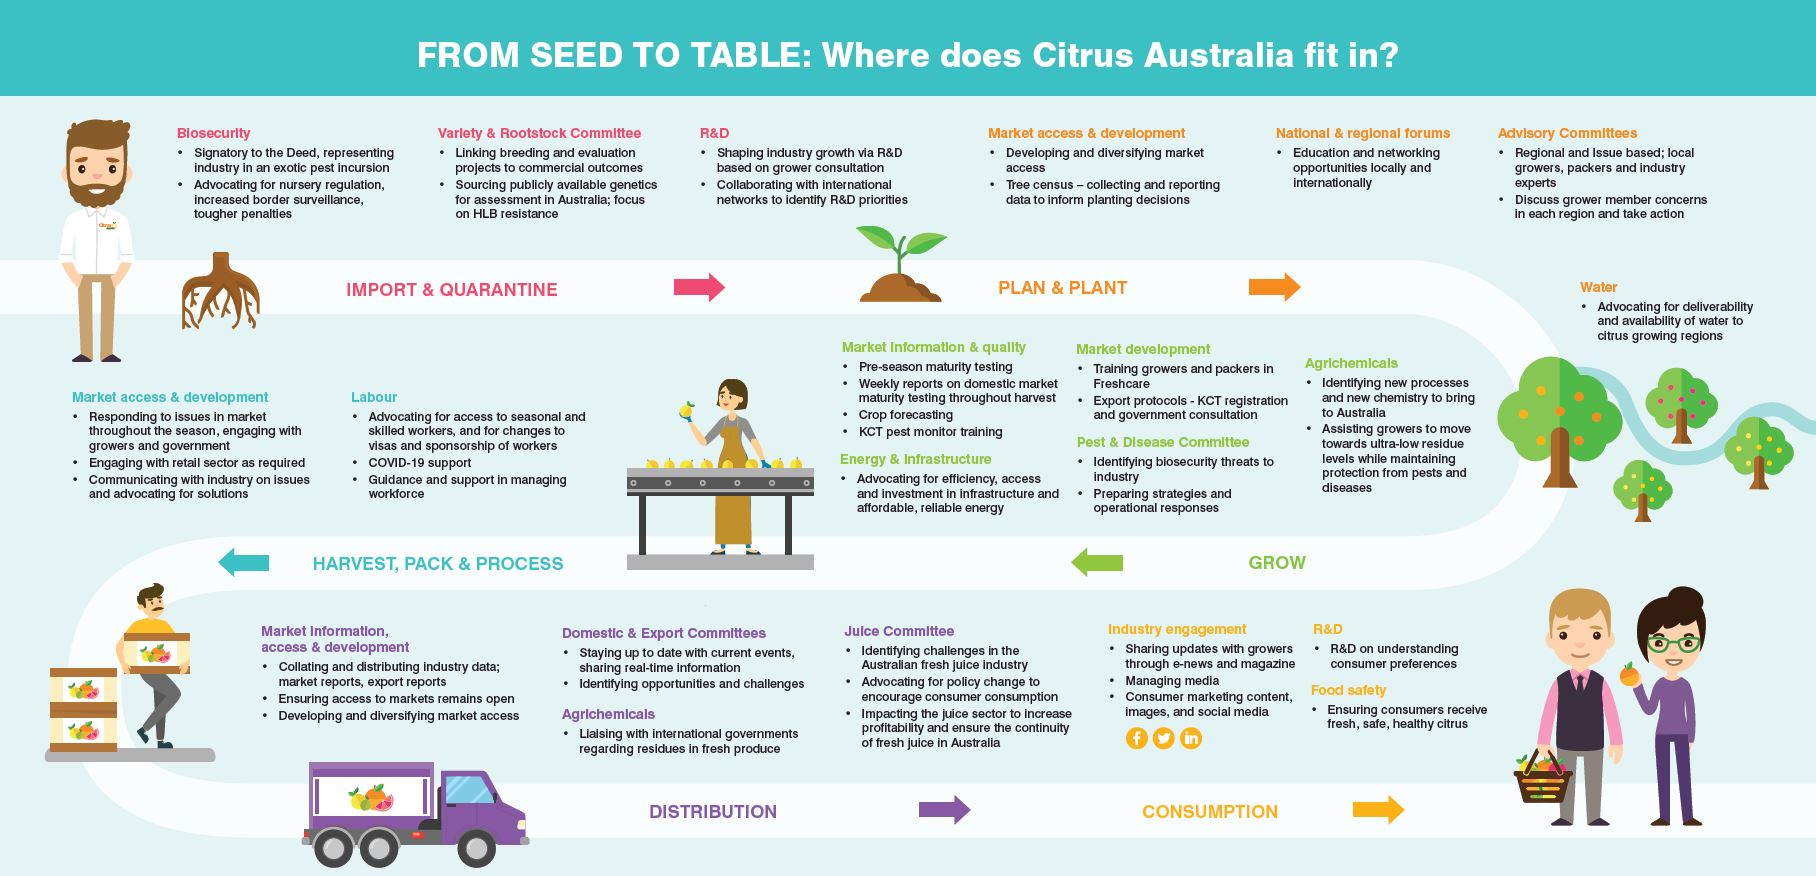 A flow chart of services provided by Citrus Australia to growers